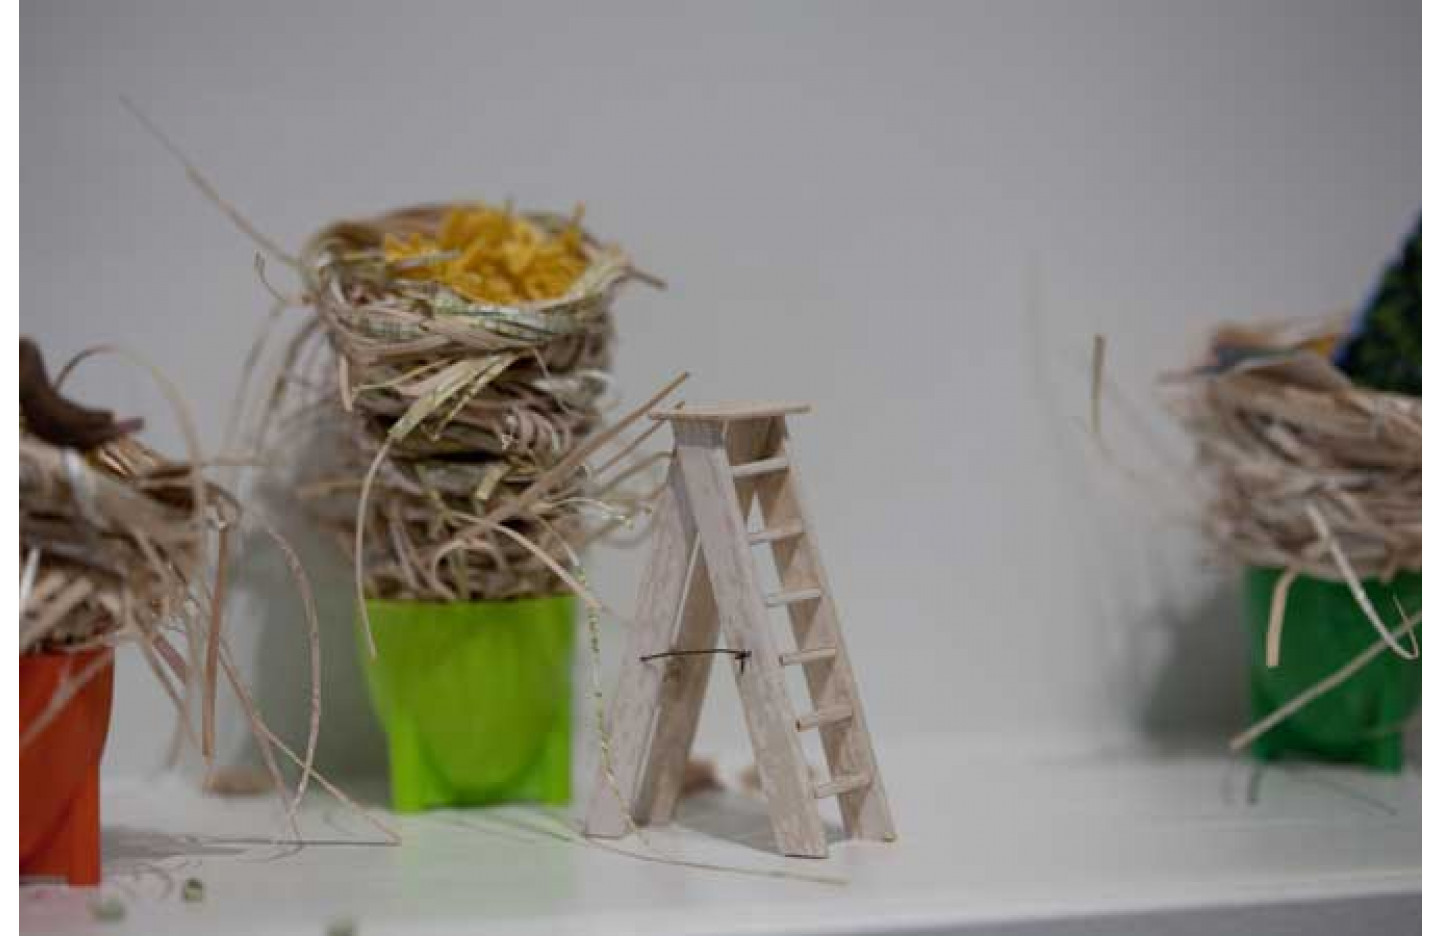 Ledge Gallery: The enchanted domestic landscape, Ramp Gallery (2010)